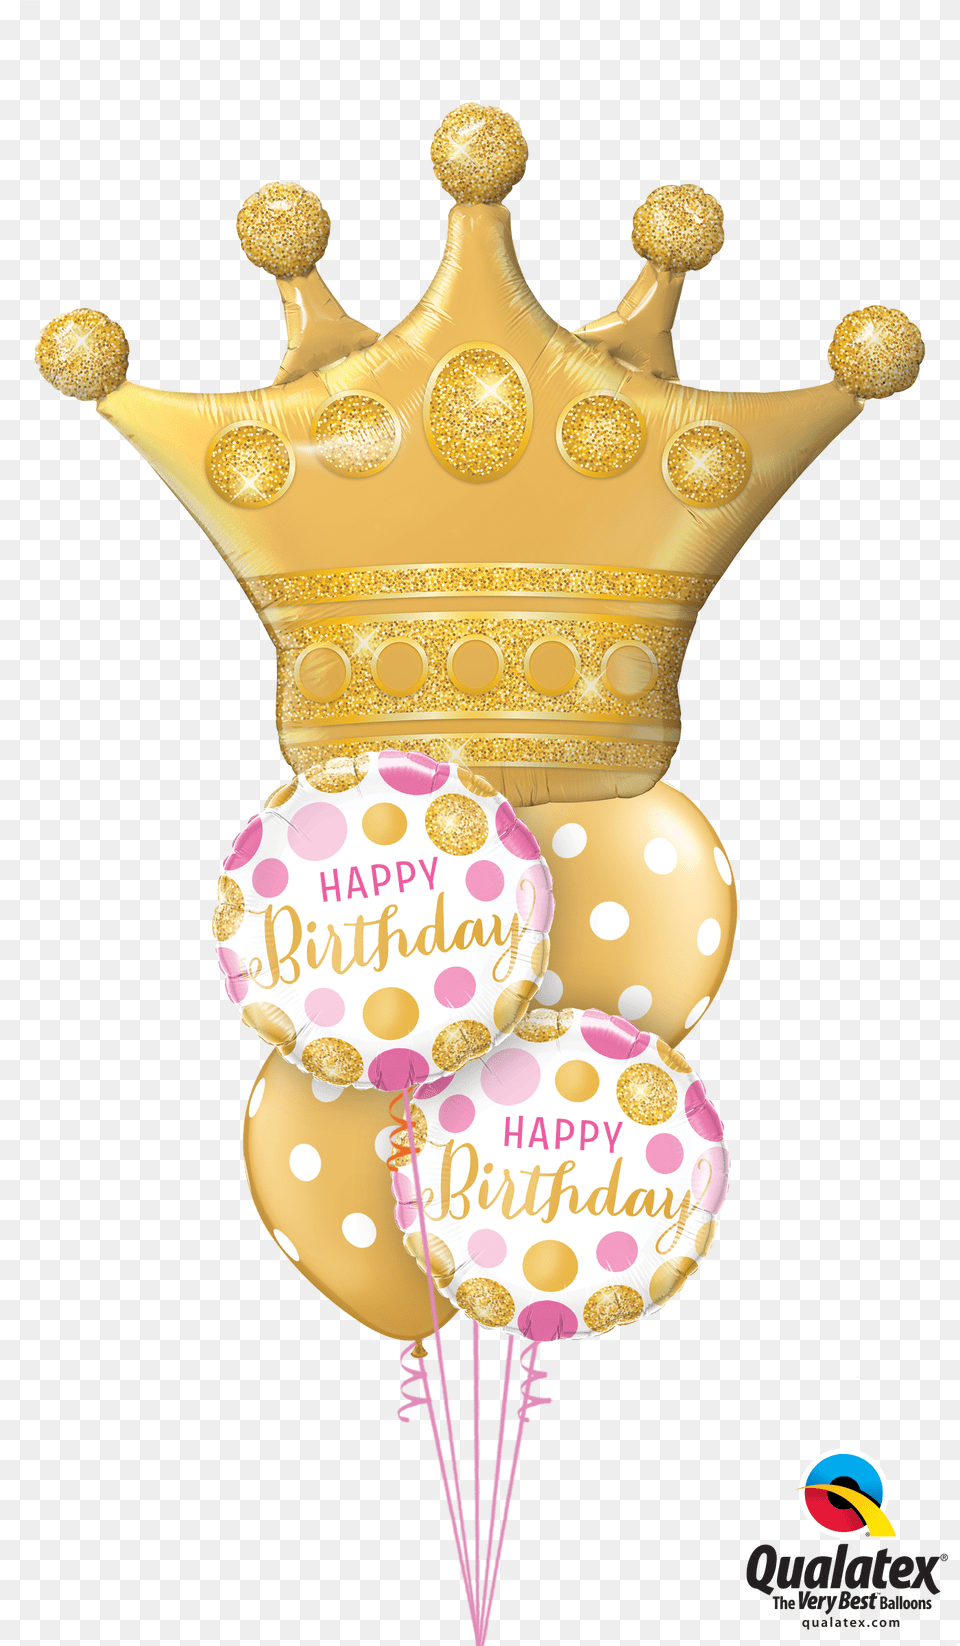 Birthday Golden Crown At London Helium Balloons Crown Balloons, Accessories, Jewelry, Badge, Logo Png